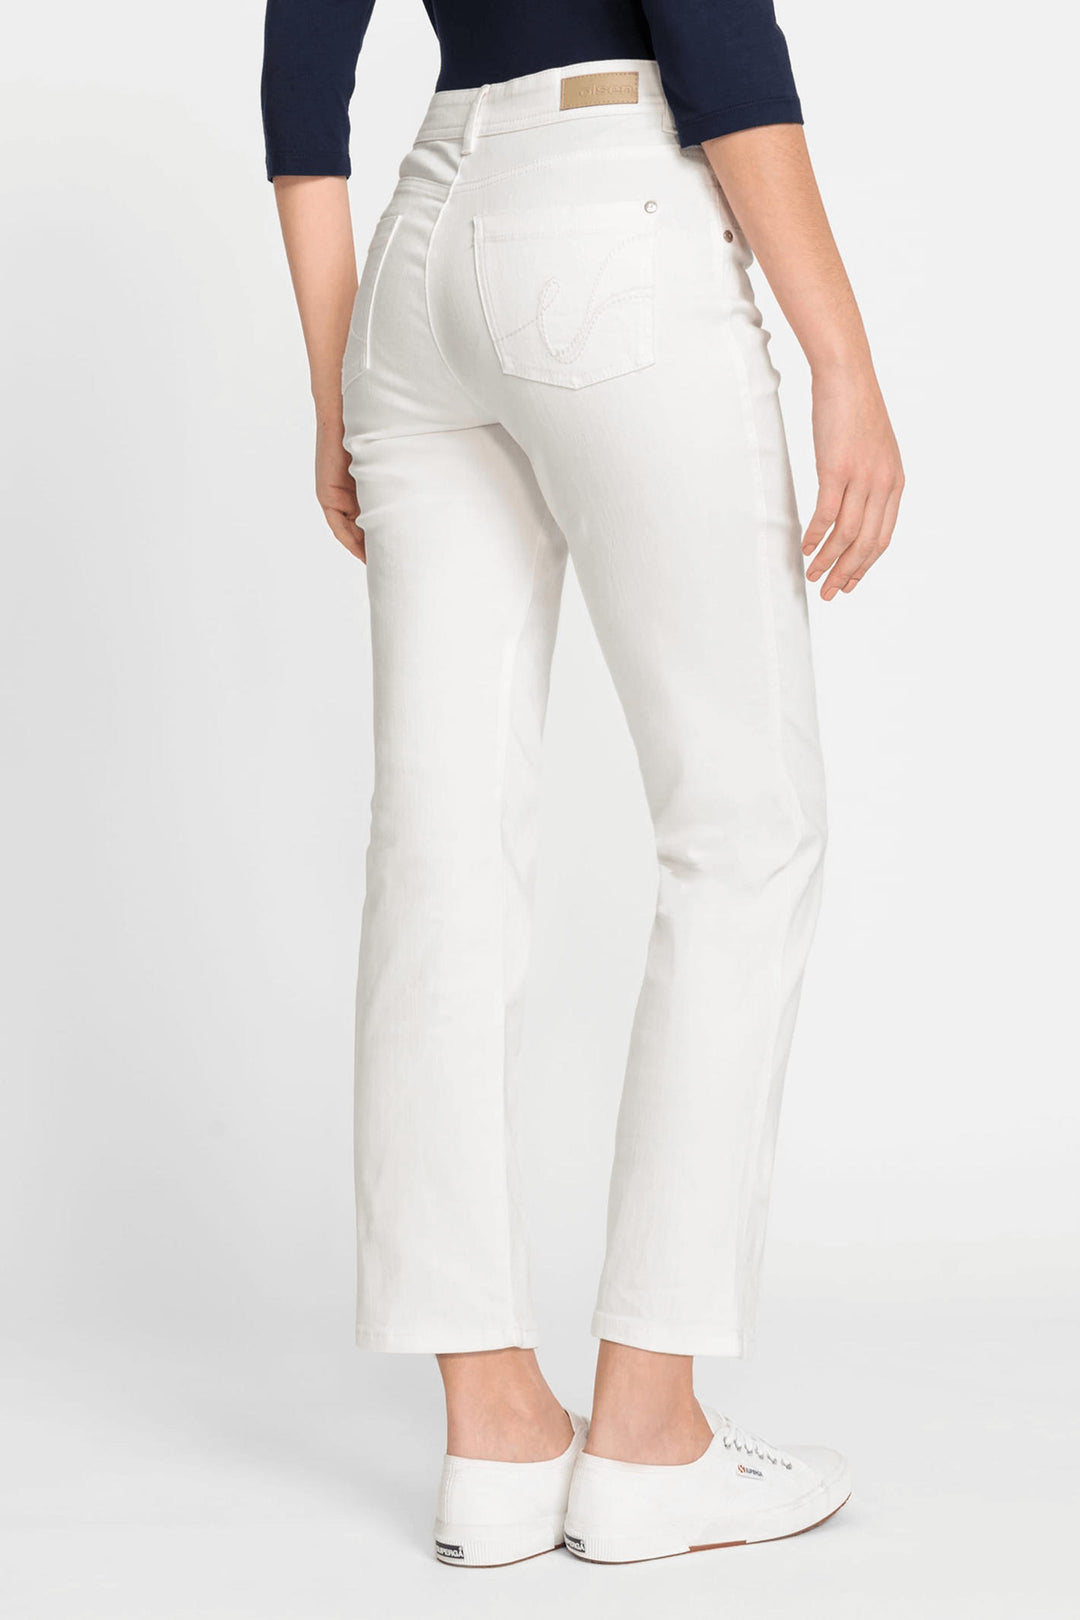 Olsen 14002067 Off White Lisa Straight Fit Power Stretch Jeans - Experience Boutique